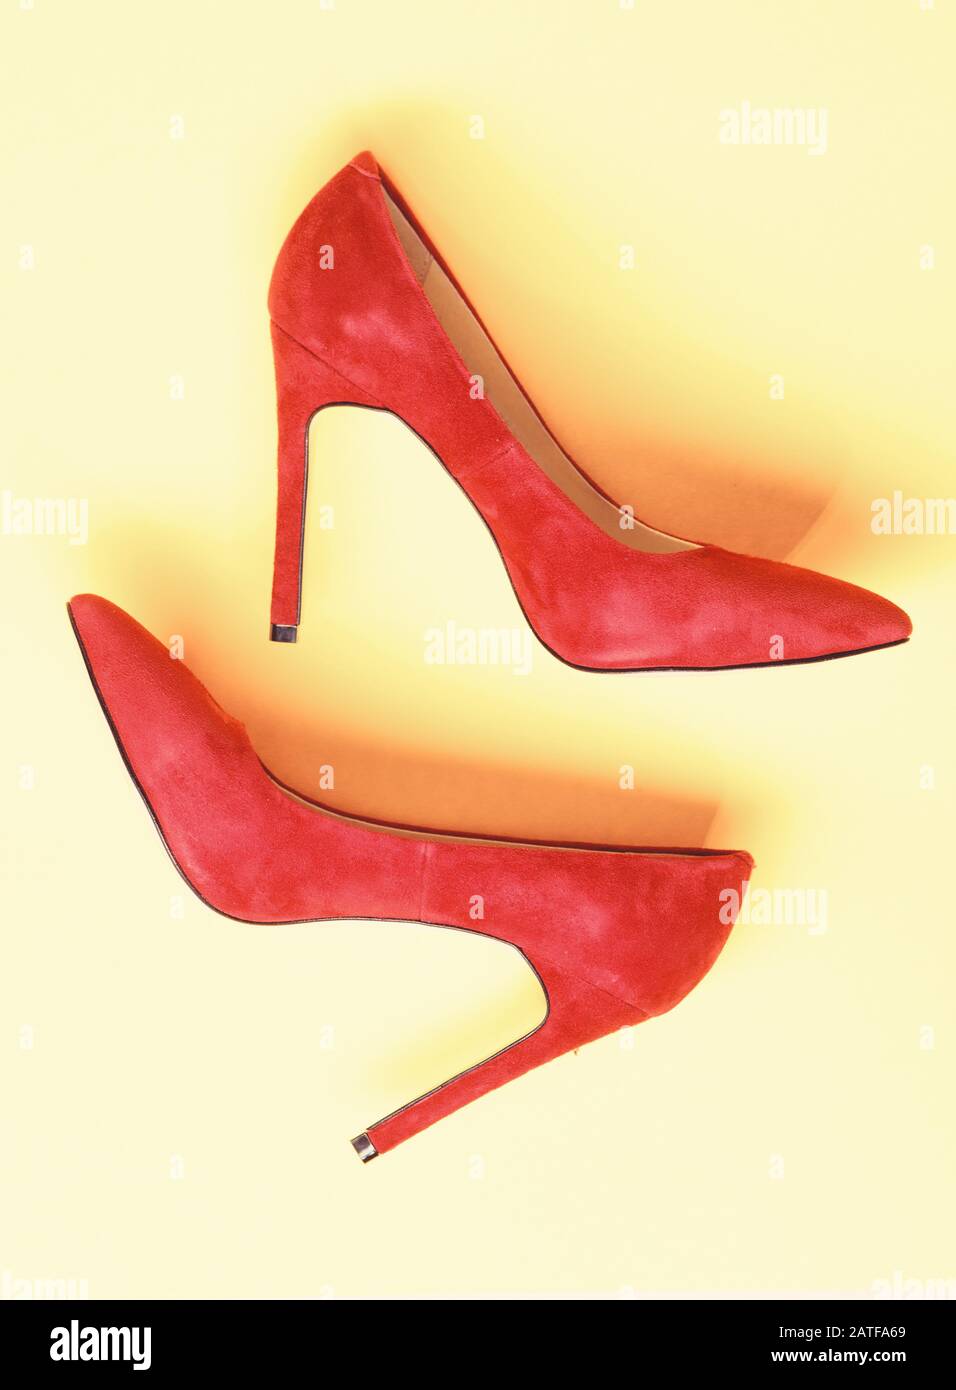 Luxury footwear concept. Footwear with thin high heels, stiletto shoes, top view. Shoes made out of red suede on yellow background. Pair of fashionable high heeled pump shoes. Stock Photo